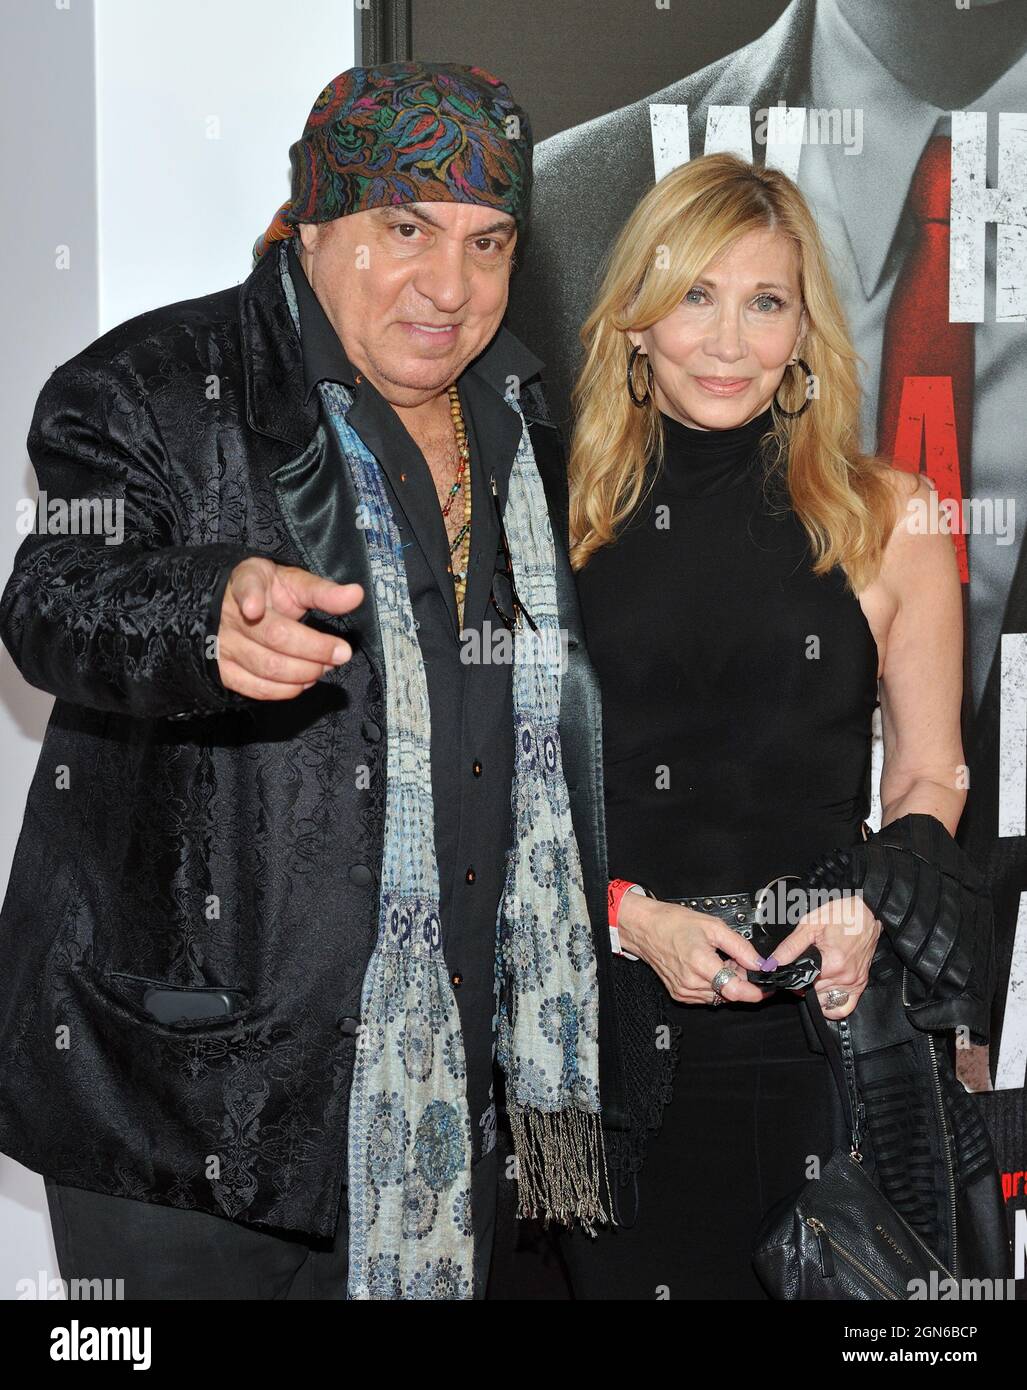 New York, USA. 22nd Sep, 2021. L-R: Steven Van Zandt and Maureen Van Zandt attend the premiere of The Many Saints of Newark at the Beacon Theater in New York, NY on September 22, 2021. (Photo by Stephen Smith/SIPA USA) Credit: Sipa USA/Alamy Live News Stock Photo